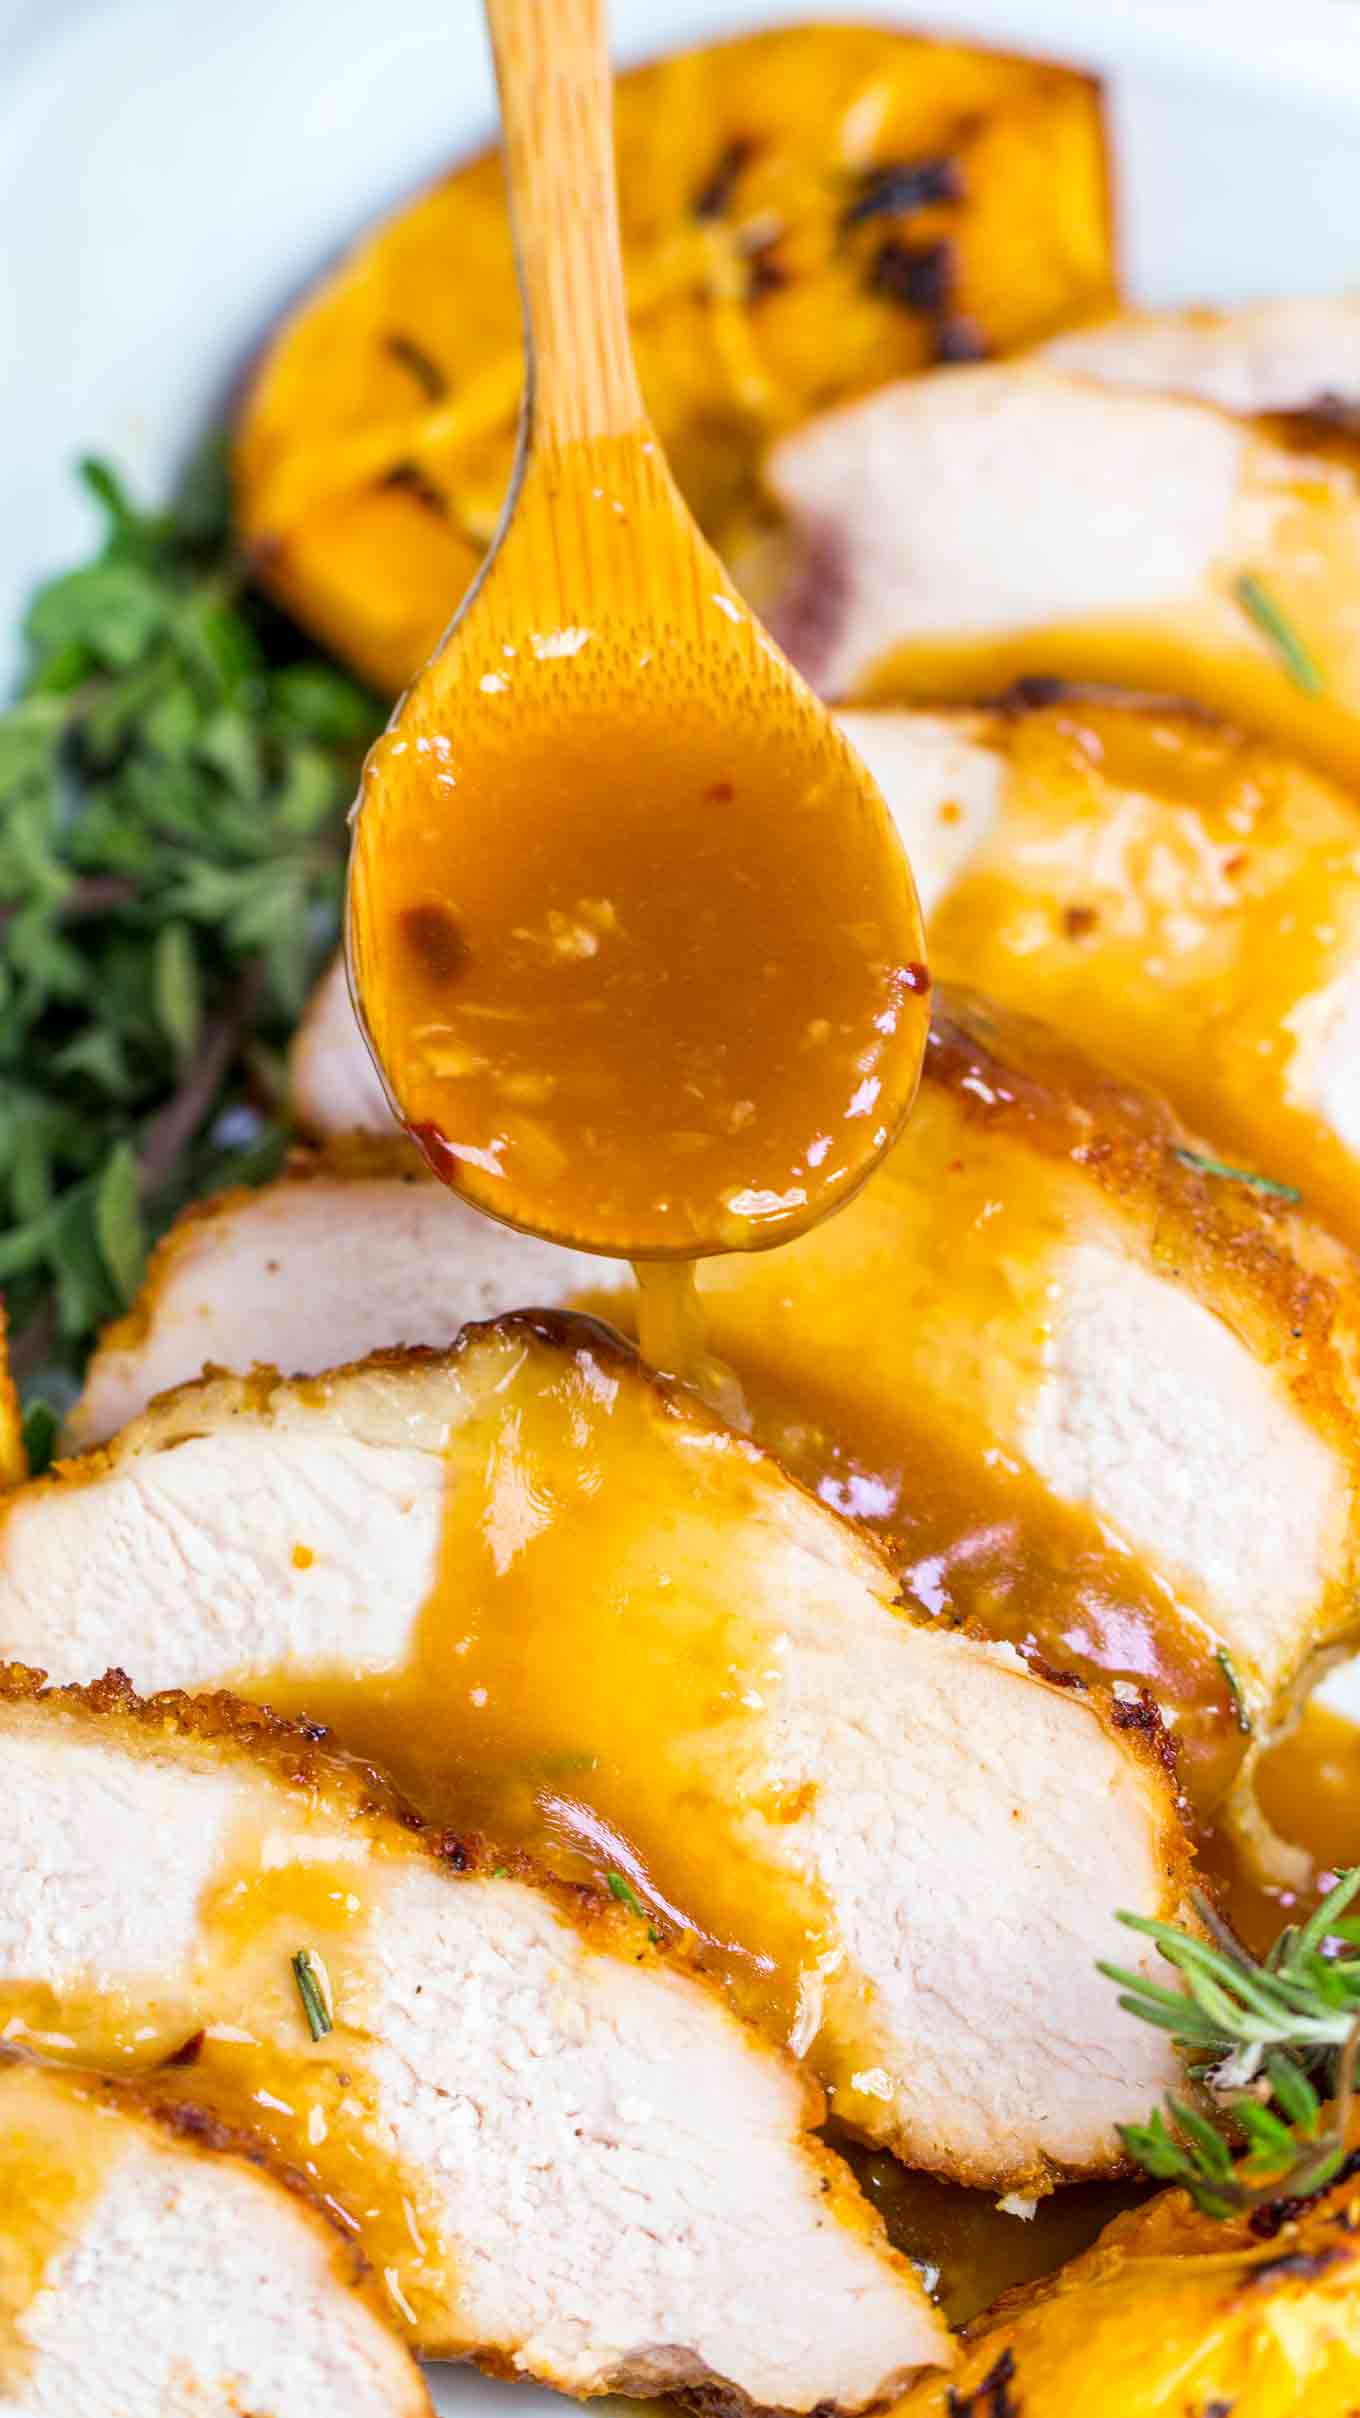 Oven Roasted Turkey Breast Recipe Savory And Delicious [video] Sweet And Savory Meals